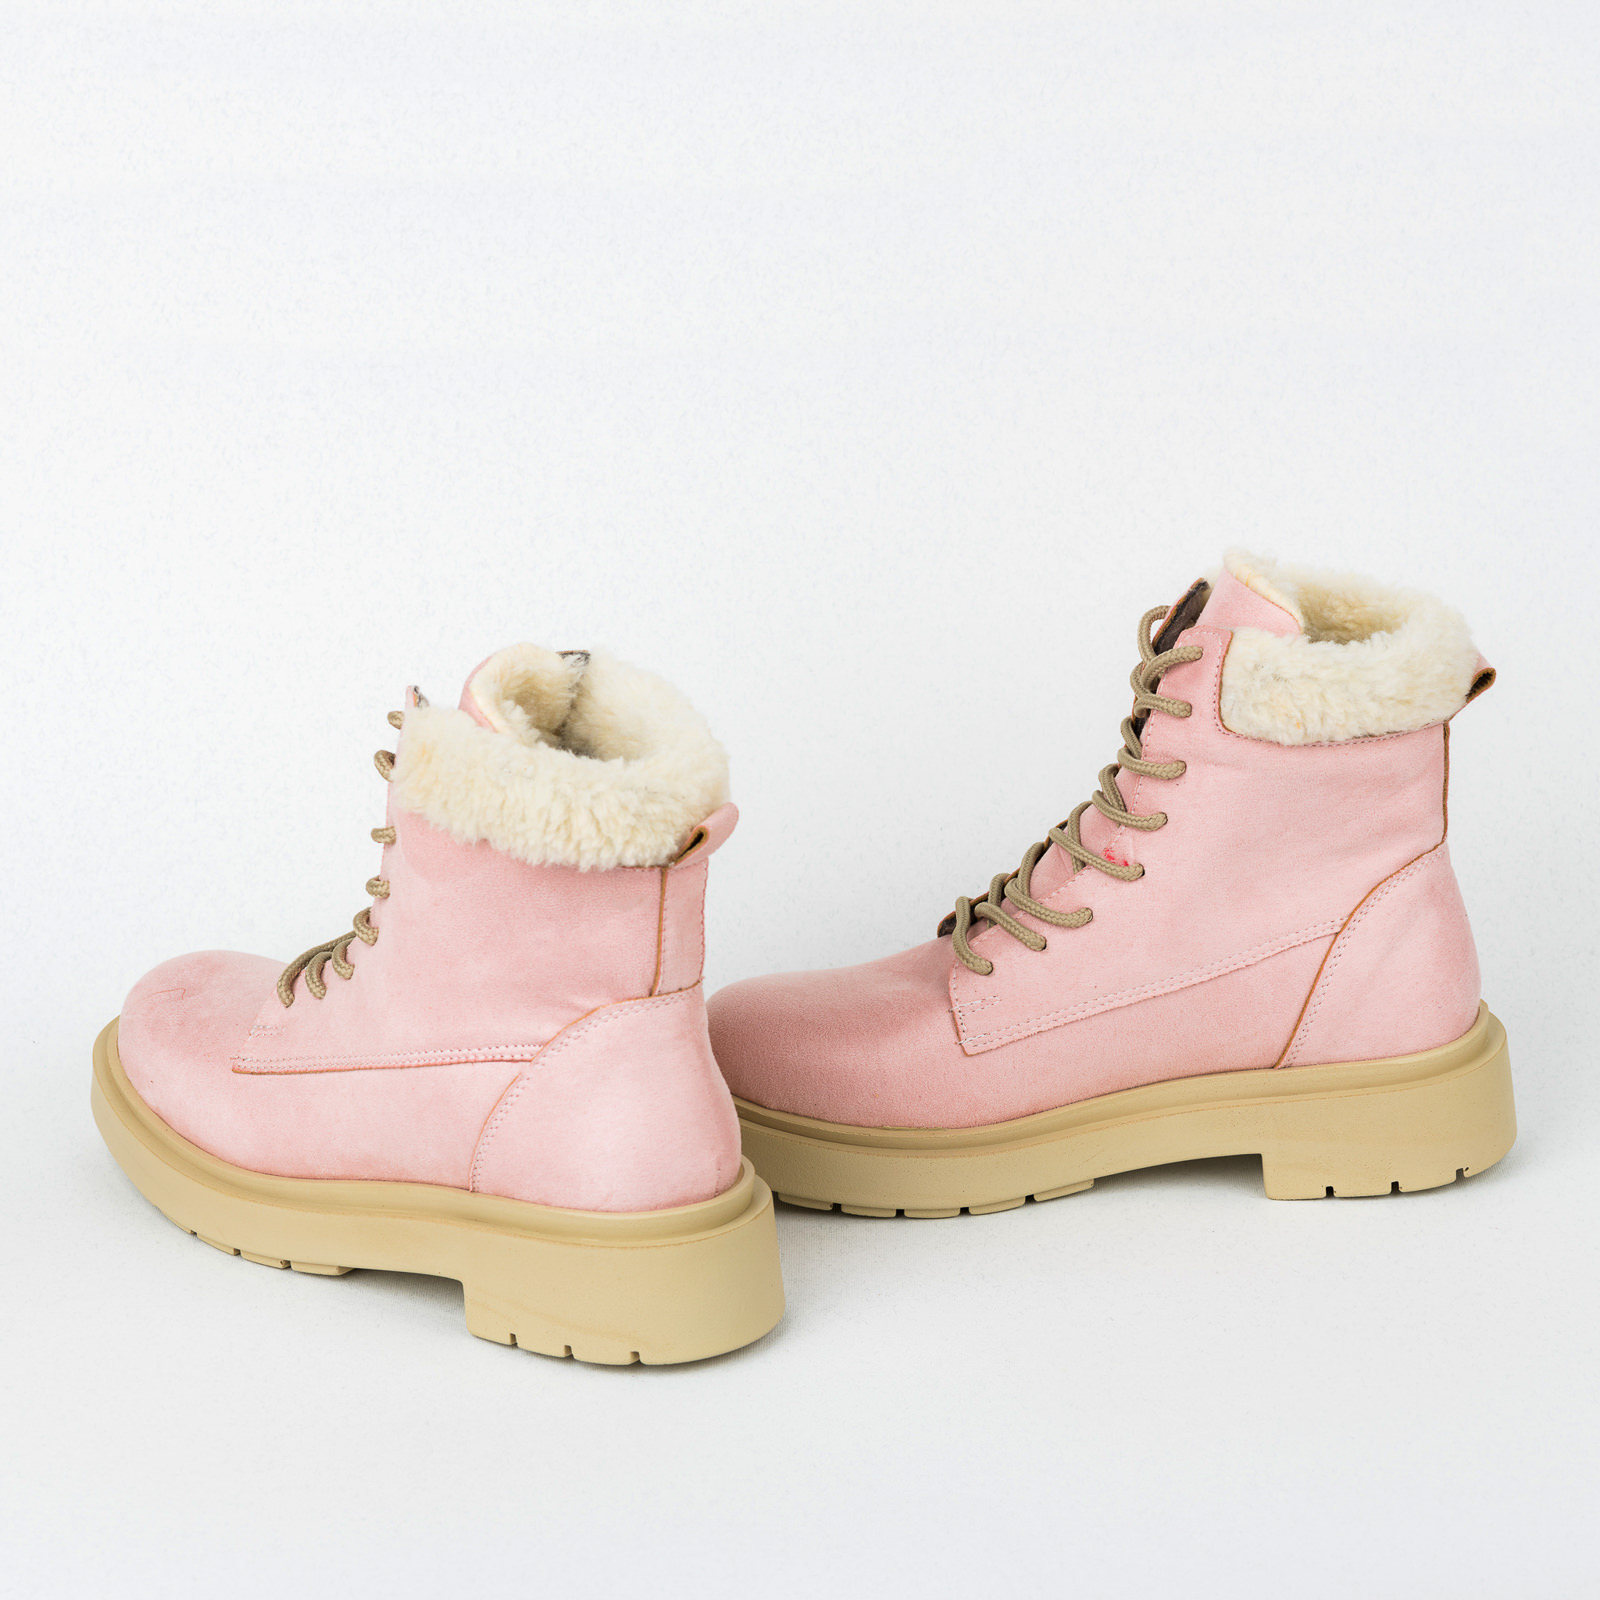 Women ankle boots B550 - ROSE